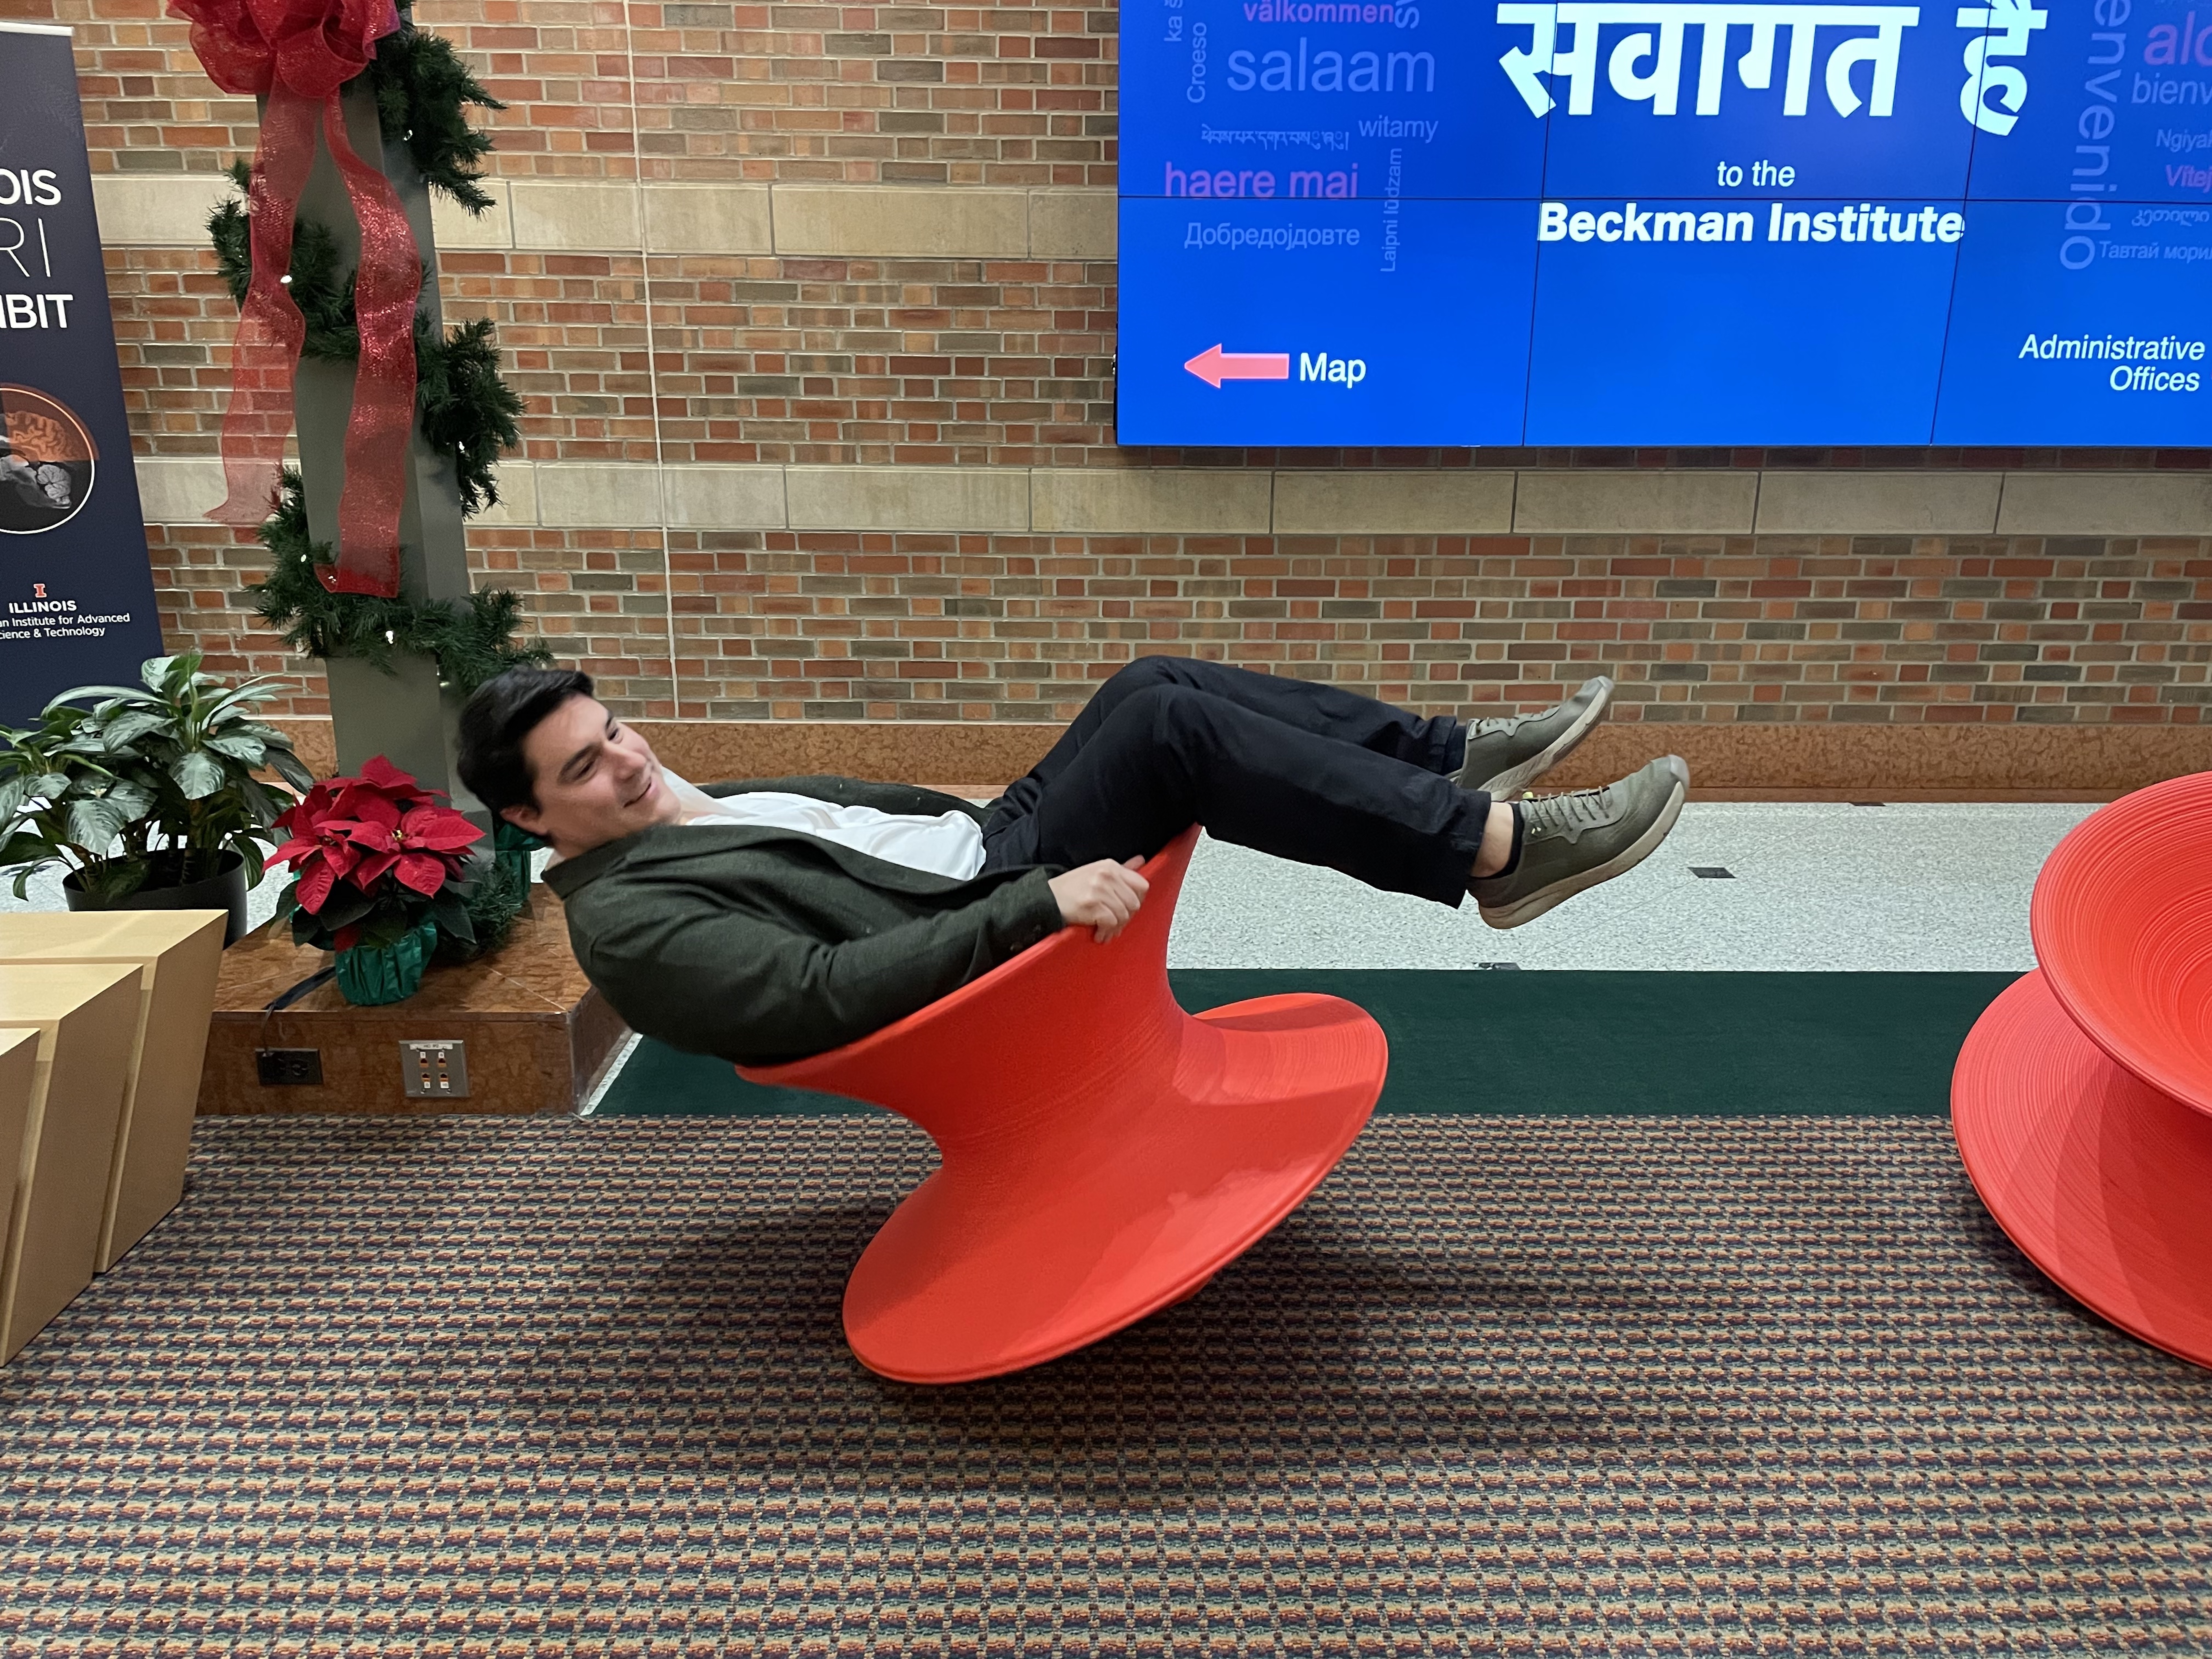 Postdoc Guillermo L. Monroy balances on an interactive chair in the Beckman Institute atrium lobby.